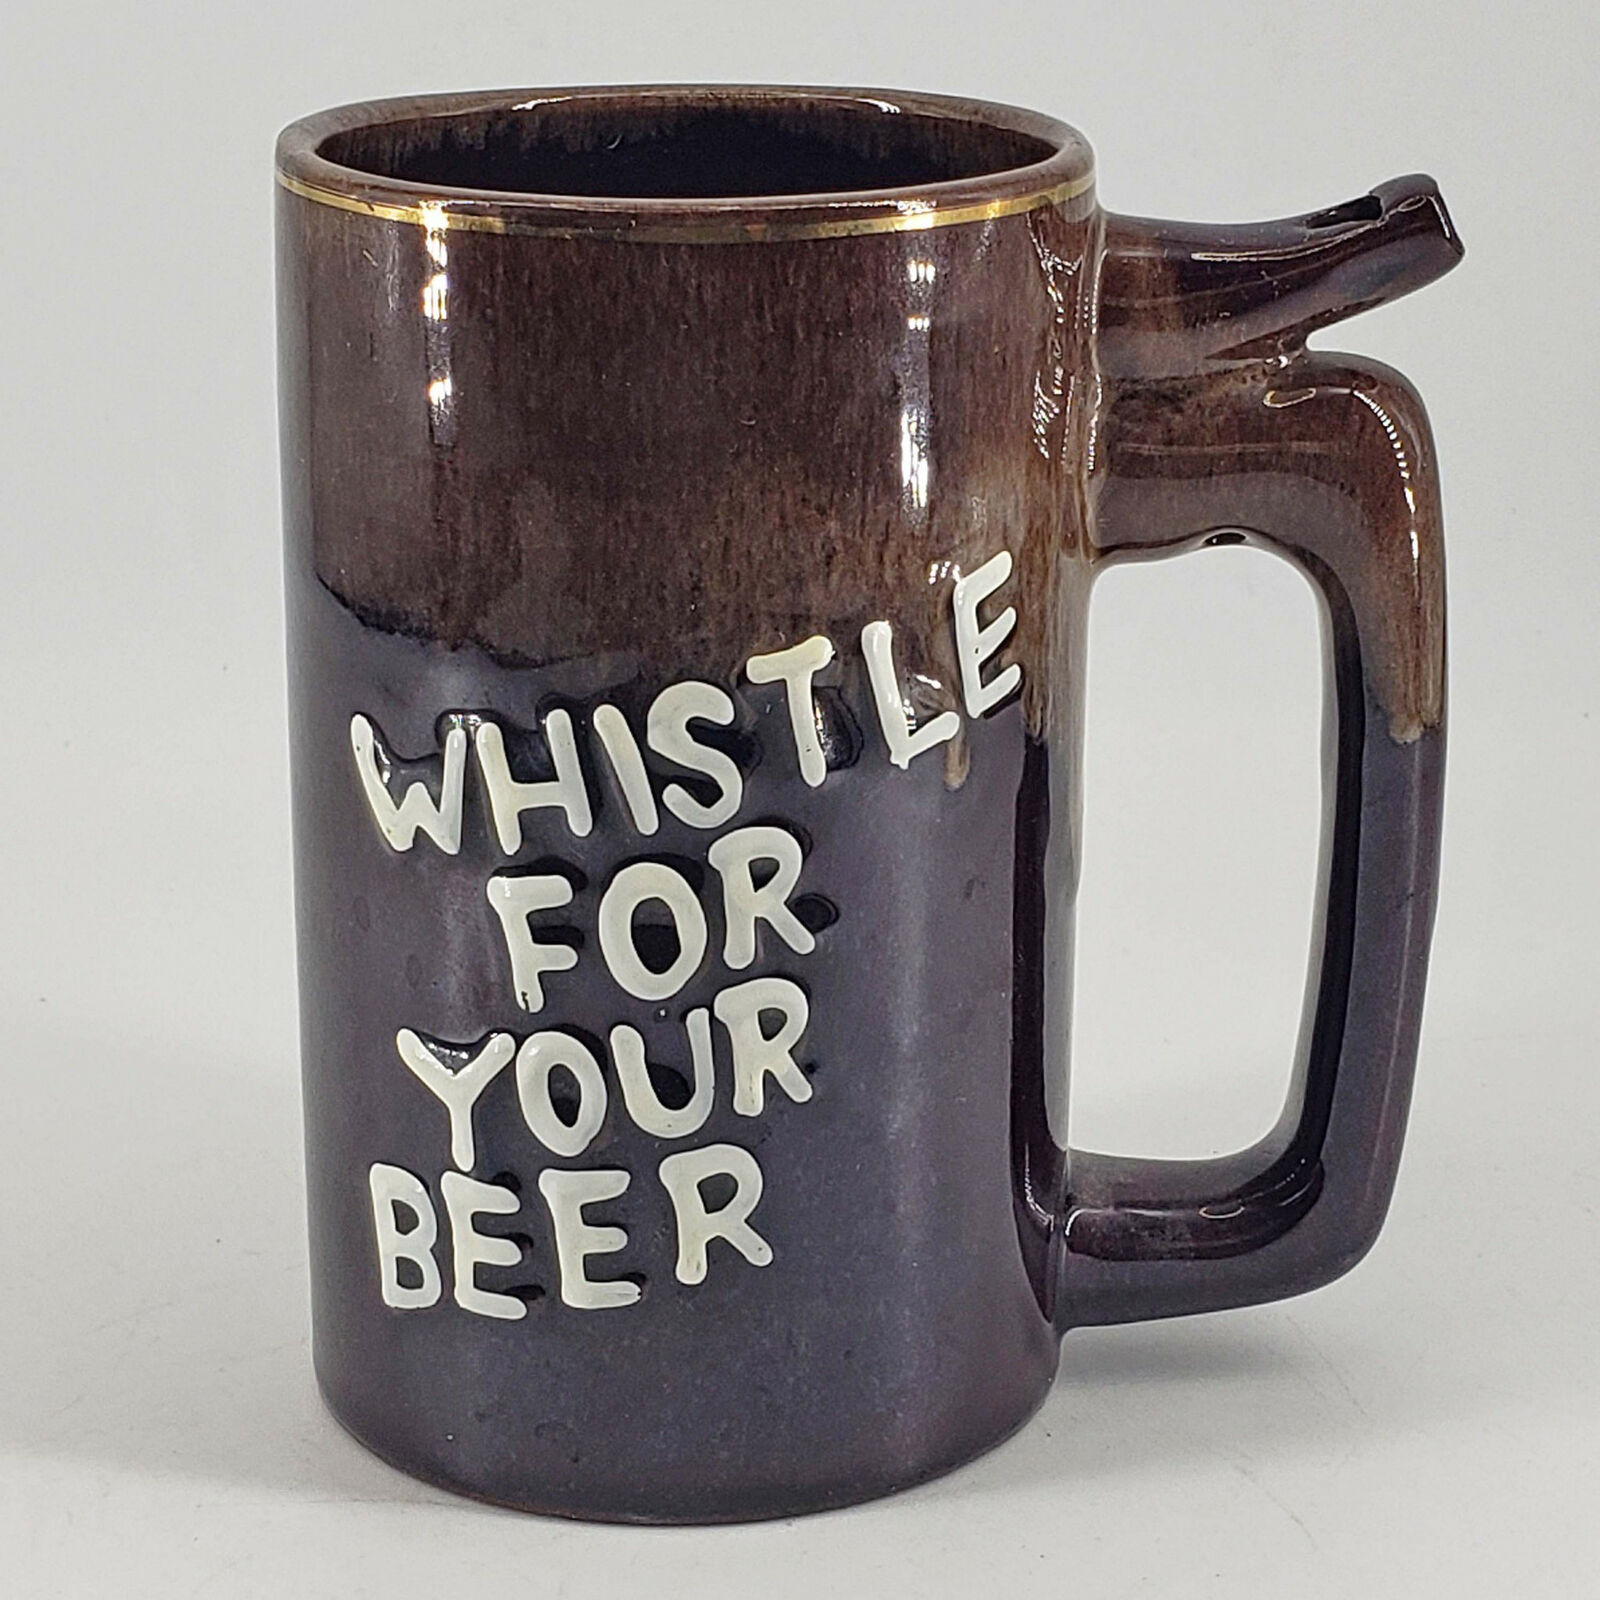 Vintage Wet your Whistle for your beer mug ceramic tankard built in whistle